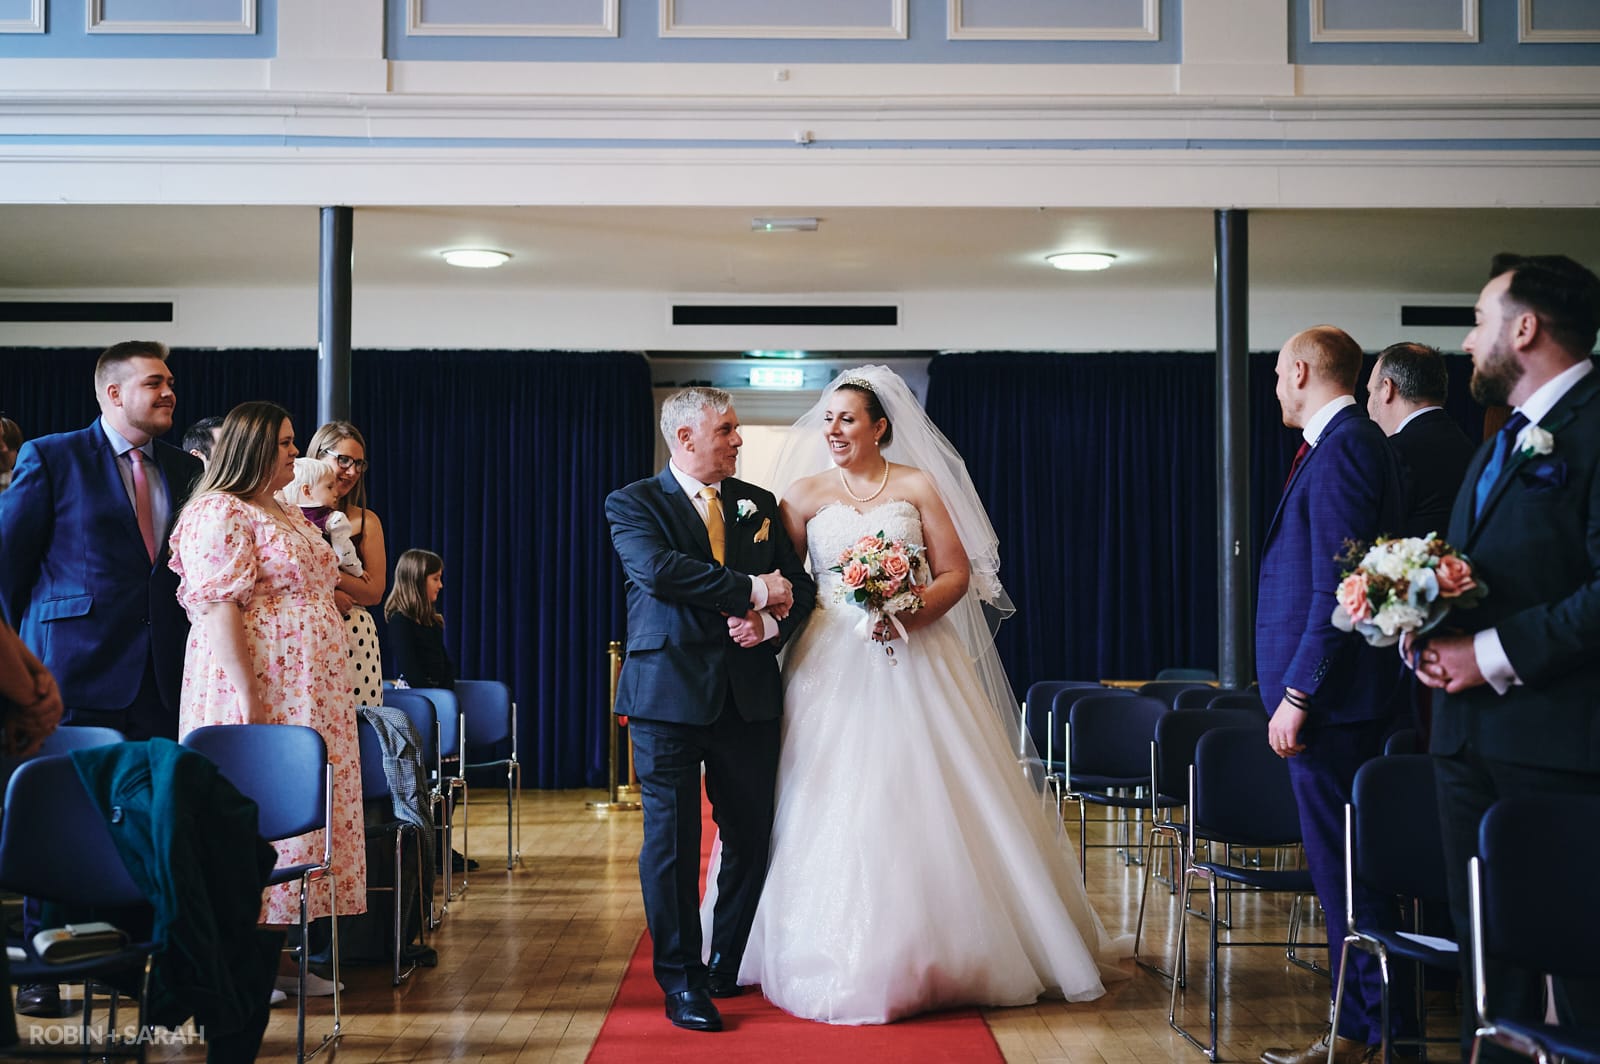 Bride and father walk up aisle together during civil ceremony at Kidderminster Town Hall